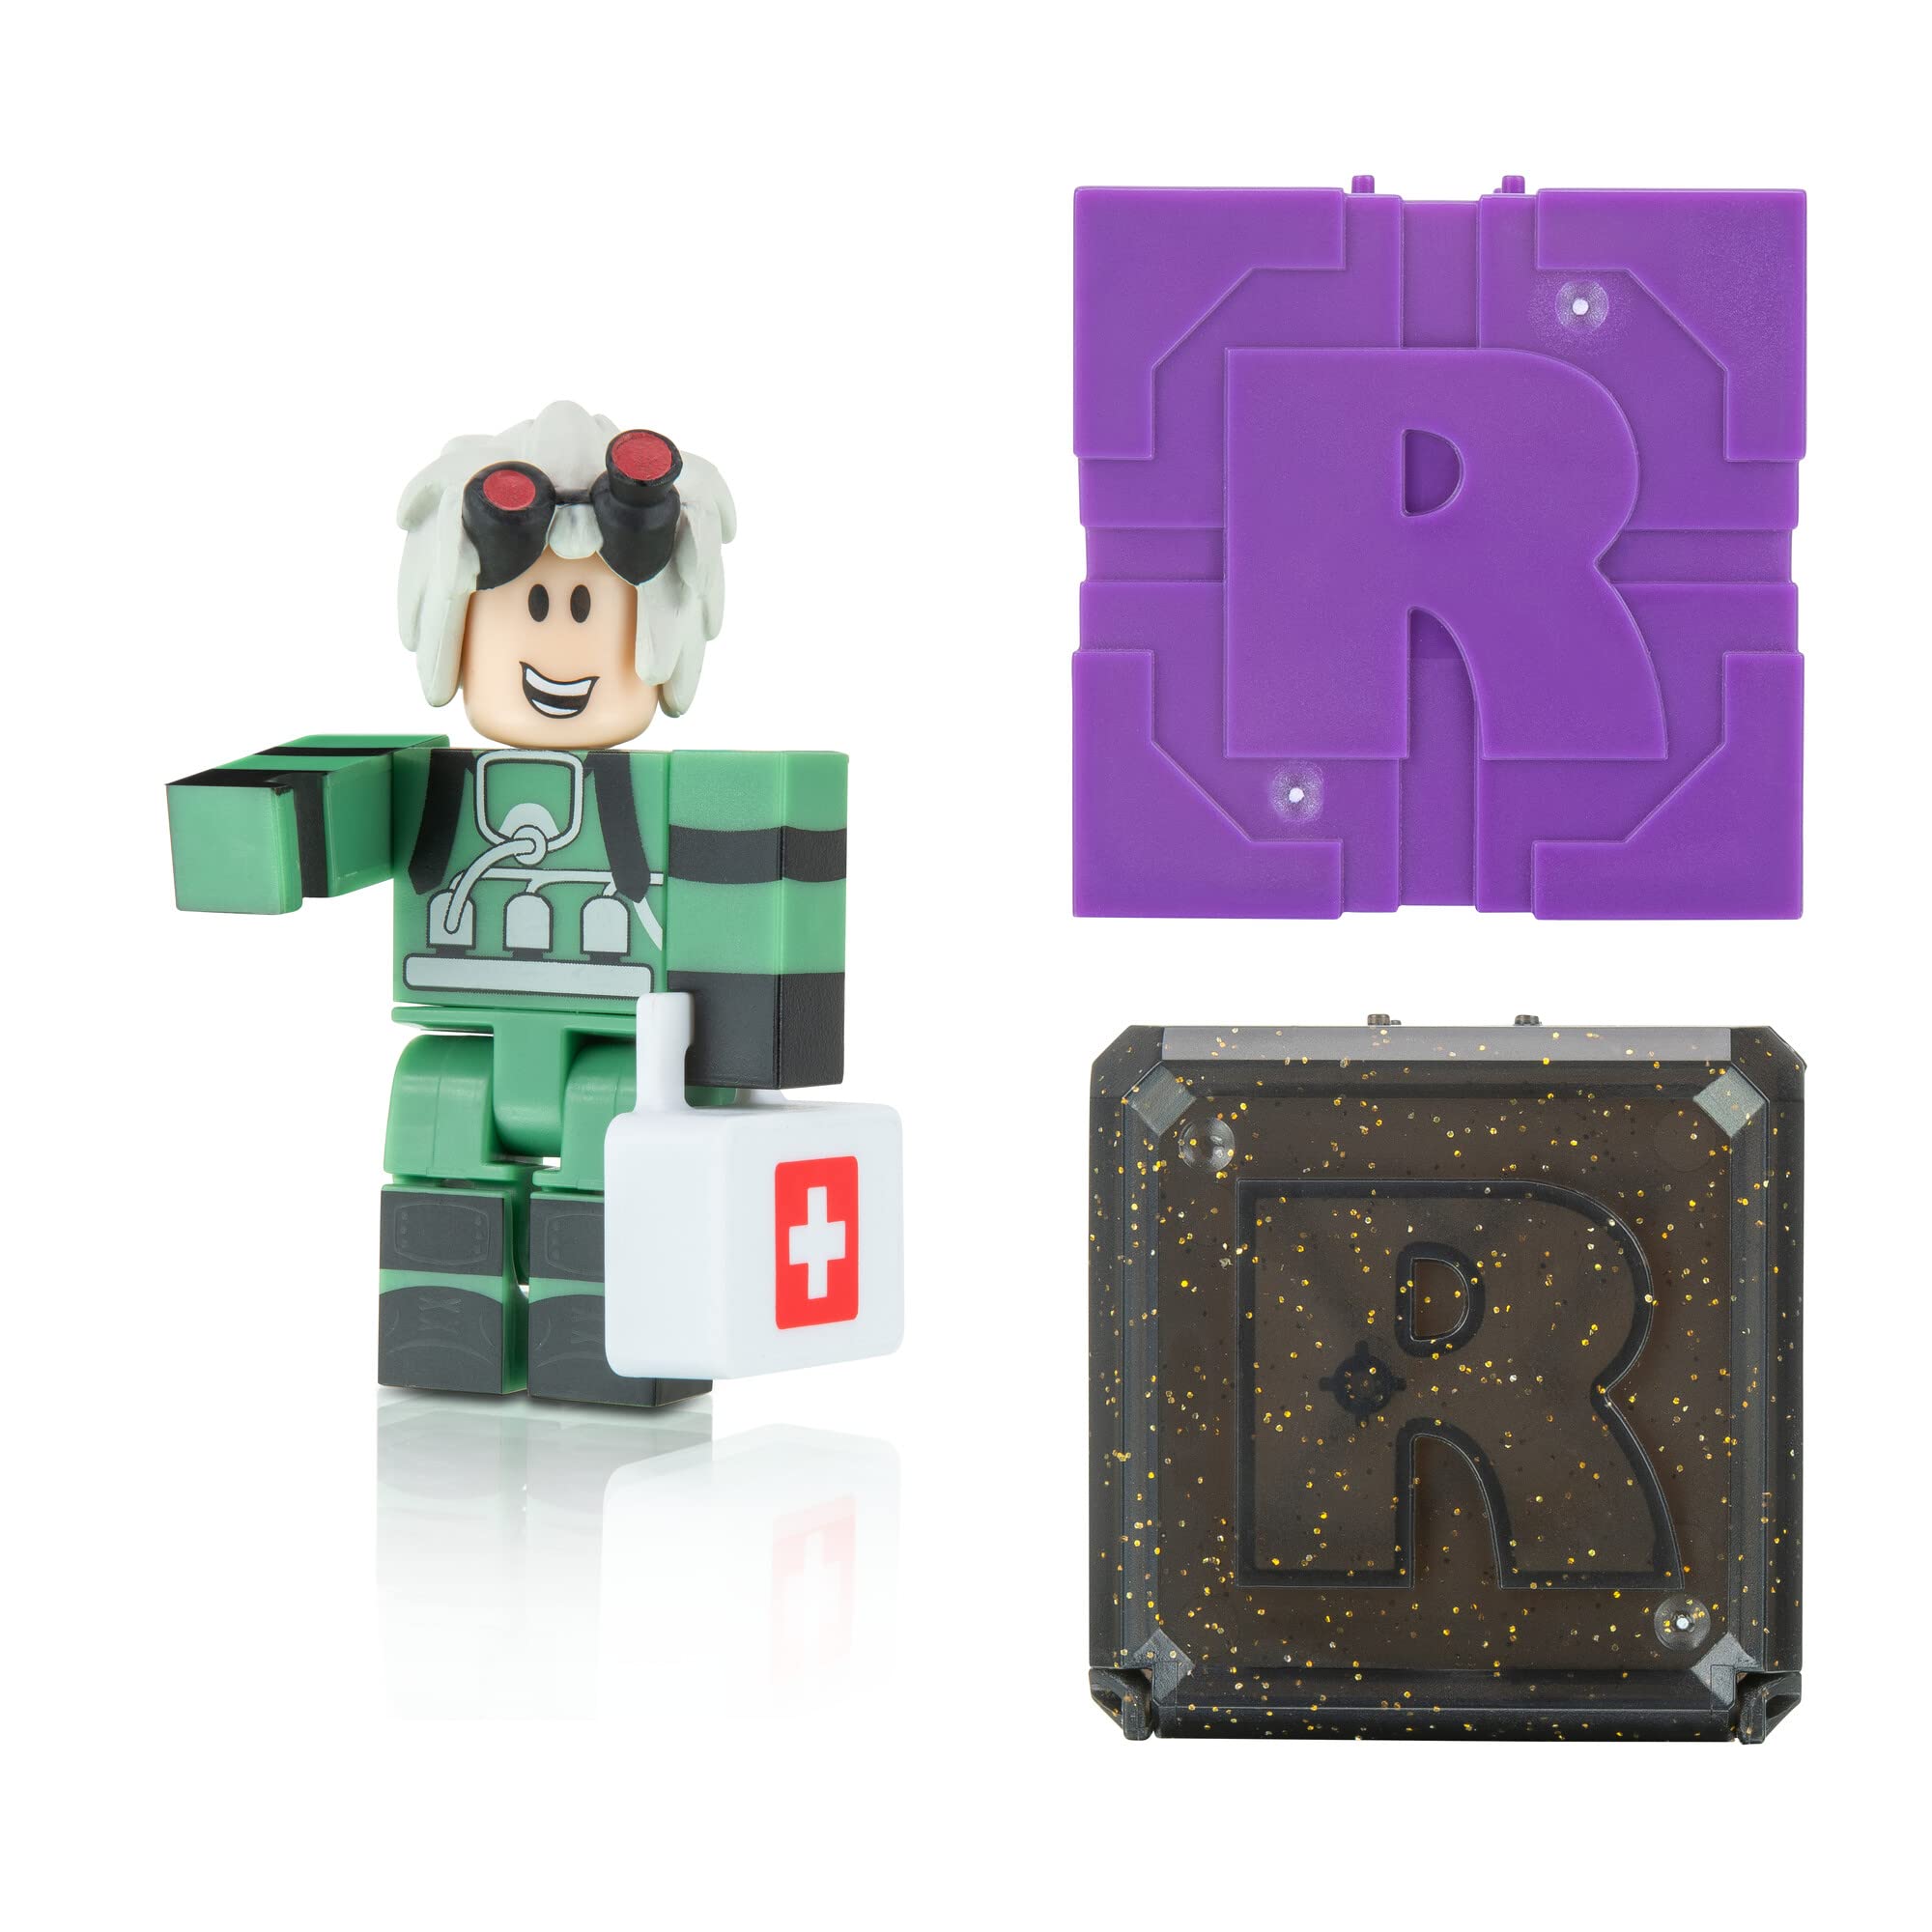 Roblox Celebrity Series 9 Mon Cheri Face Virtual Code And The Toy Black Box